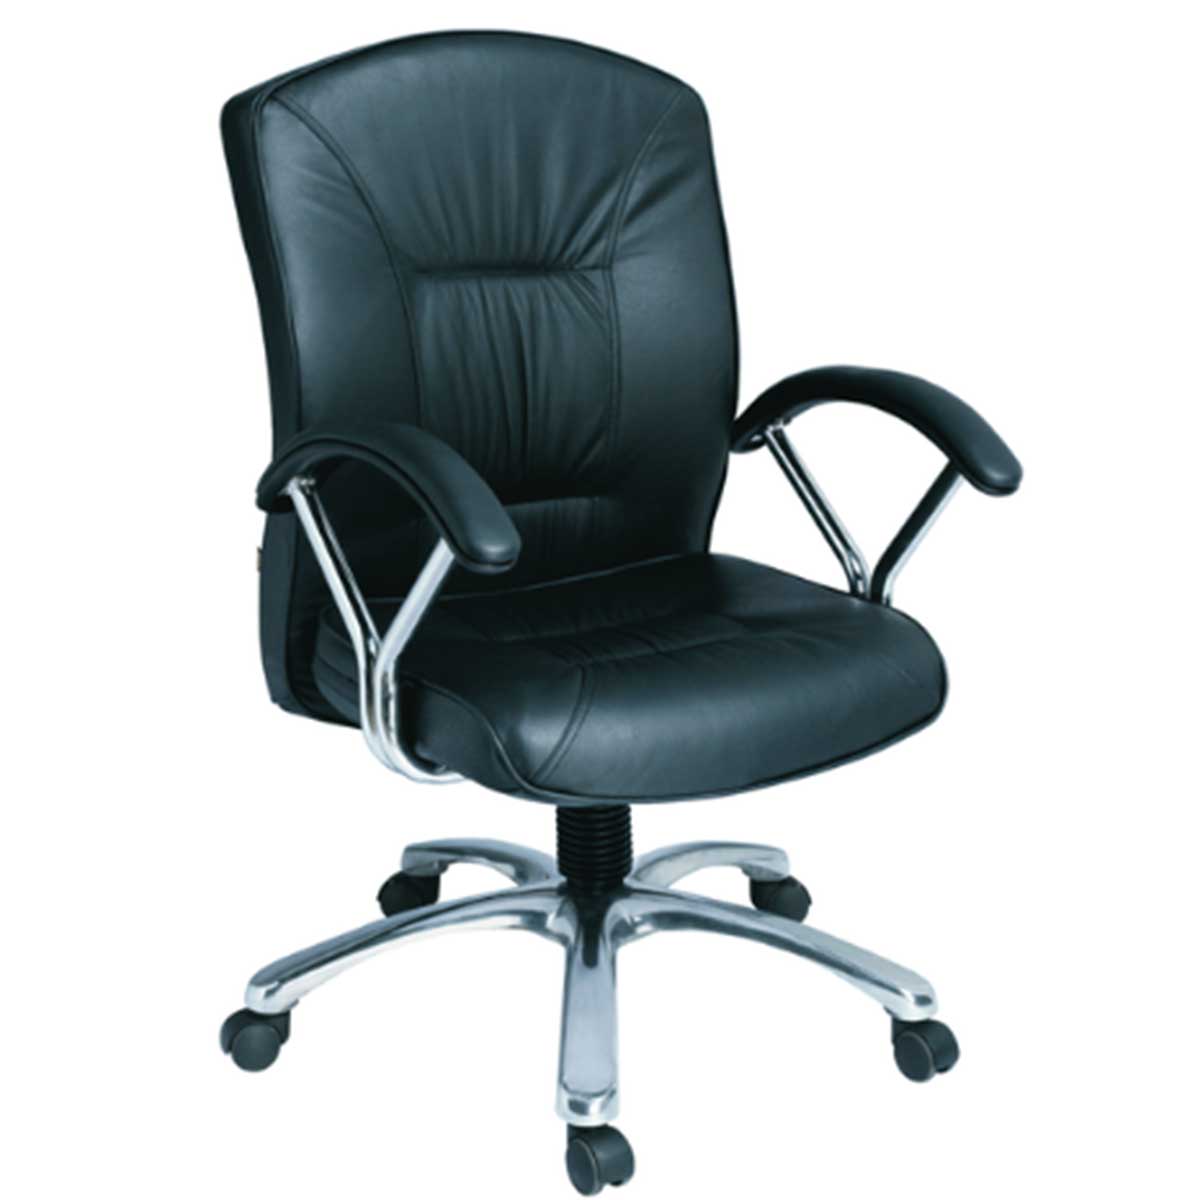 Godrej office chair Manufacturers, Suppliers, Exporters in Delhi 